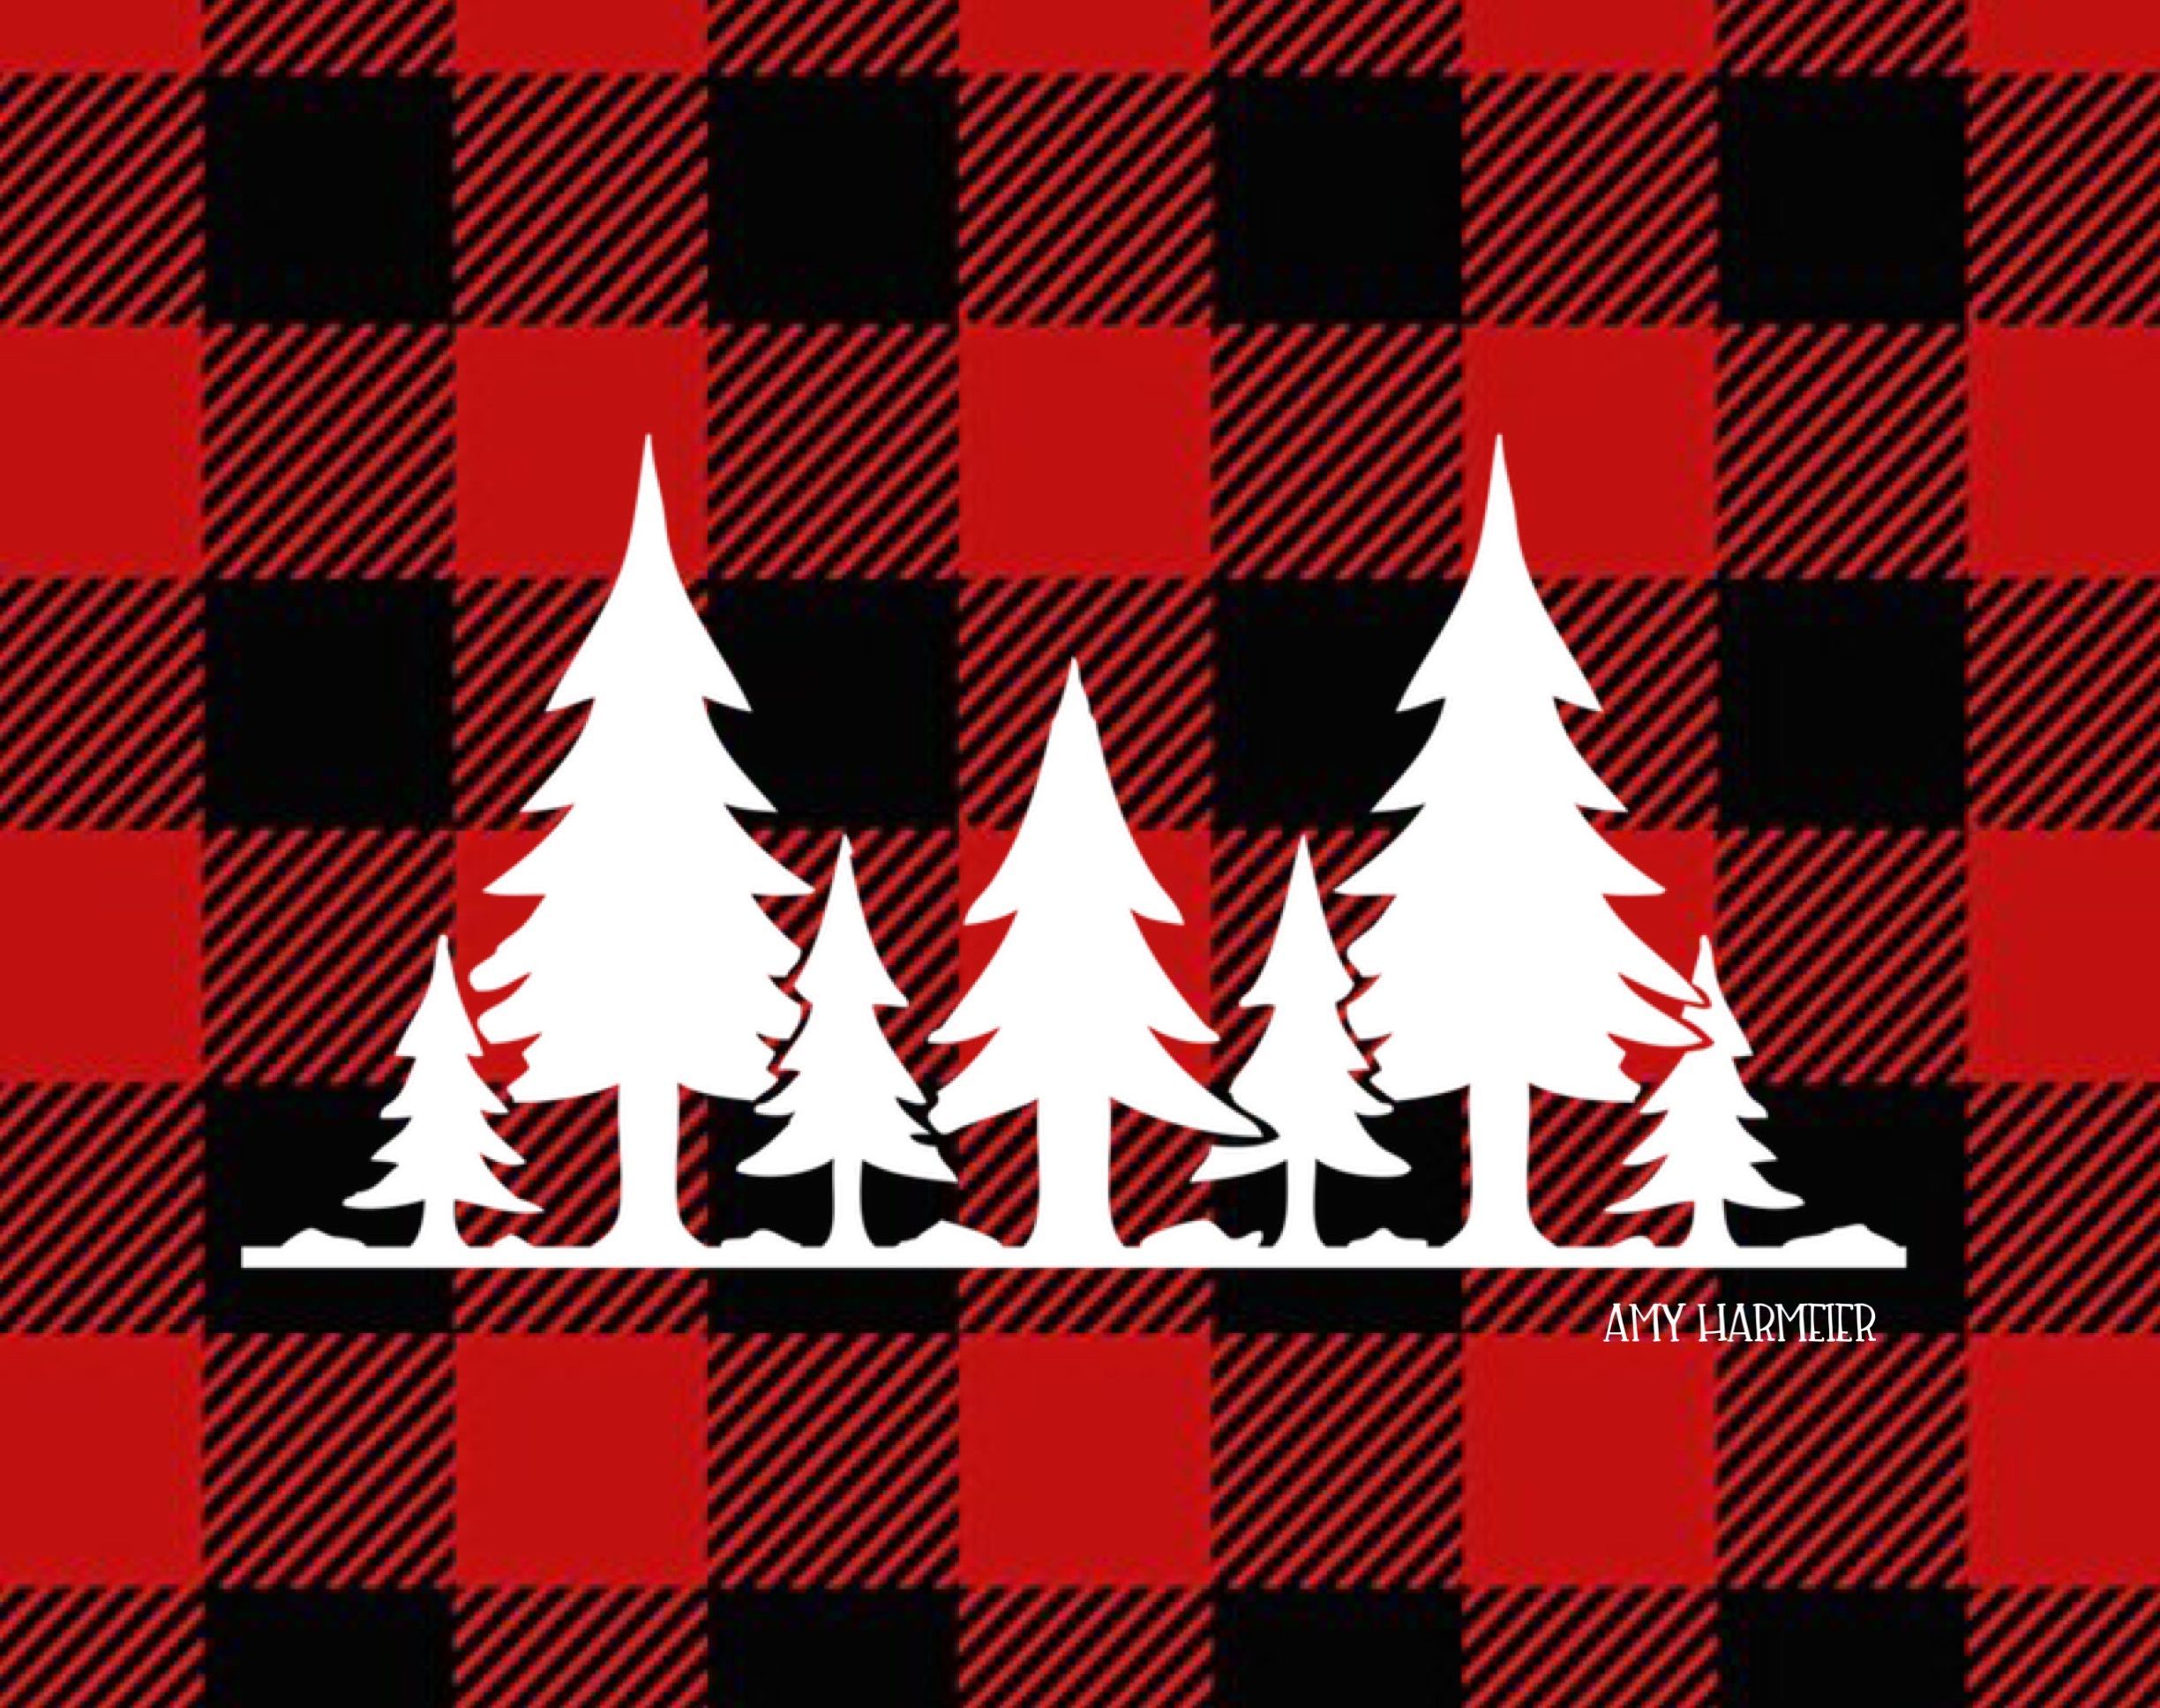 100+] Black And Red Plaid Wallpapers